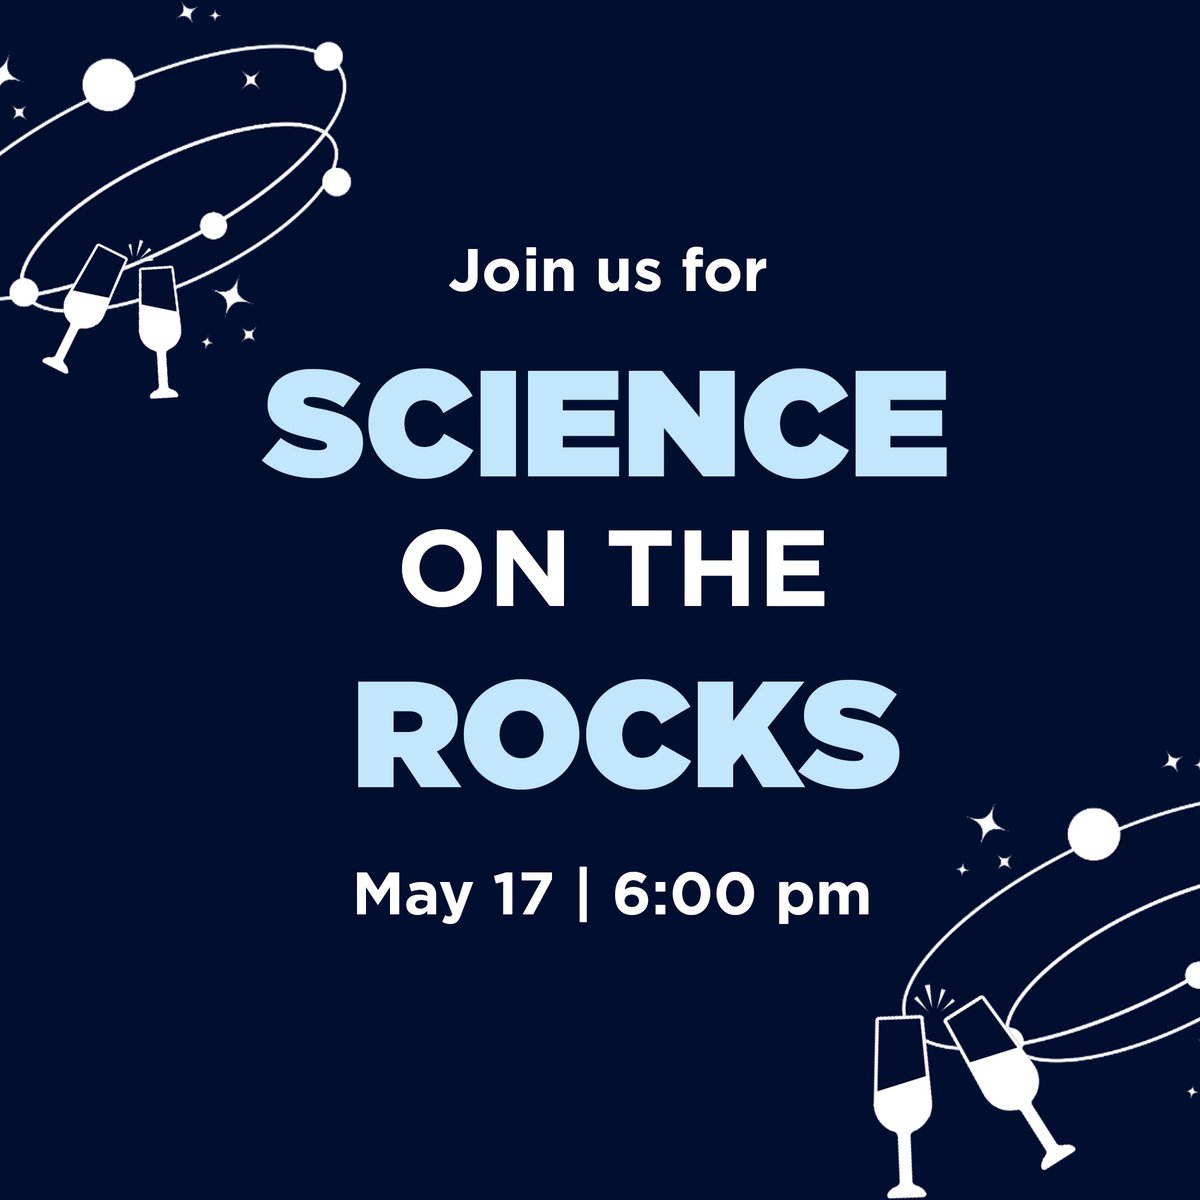 ⚗️ Don't miss out on the chance to experience the joys of science at Cosmic Cocktails and Quantum Quirks: An Adults-Only Science Social in Charlotte! Join fellow alumni on May 17 for an evening of cosmic cocktails and hands-on experiments! Learn more: bit.ly/3xGw8lL.